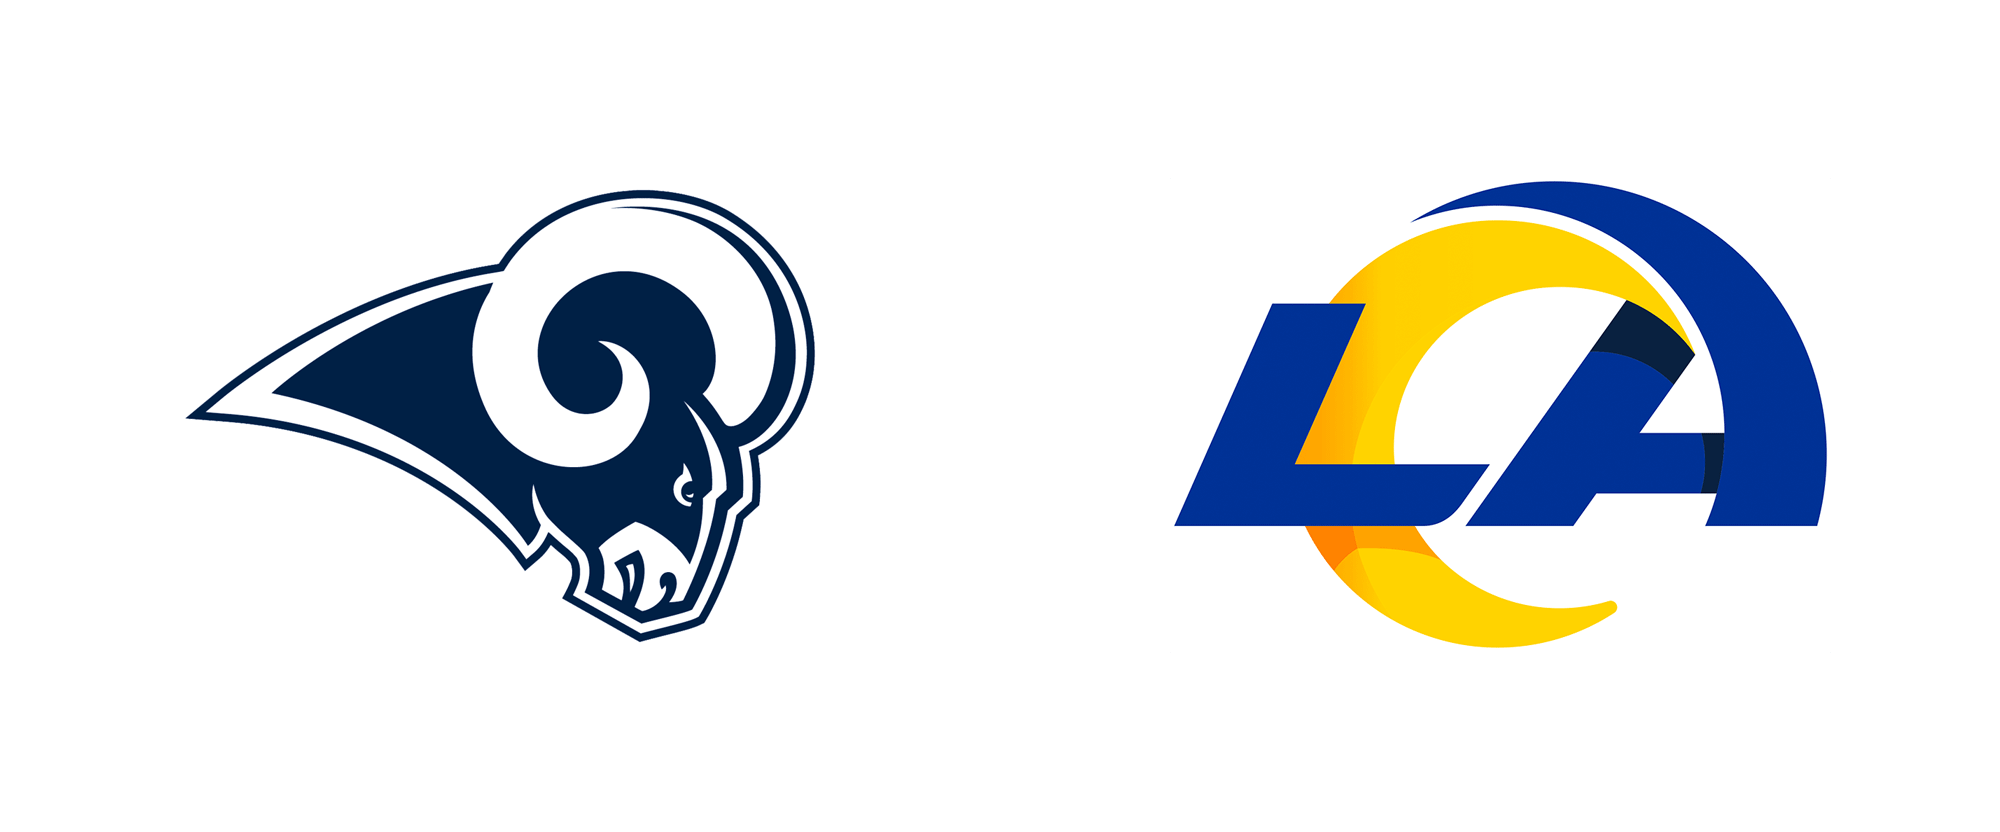 la_rams_logo_before_after.png